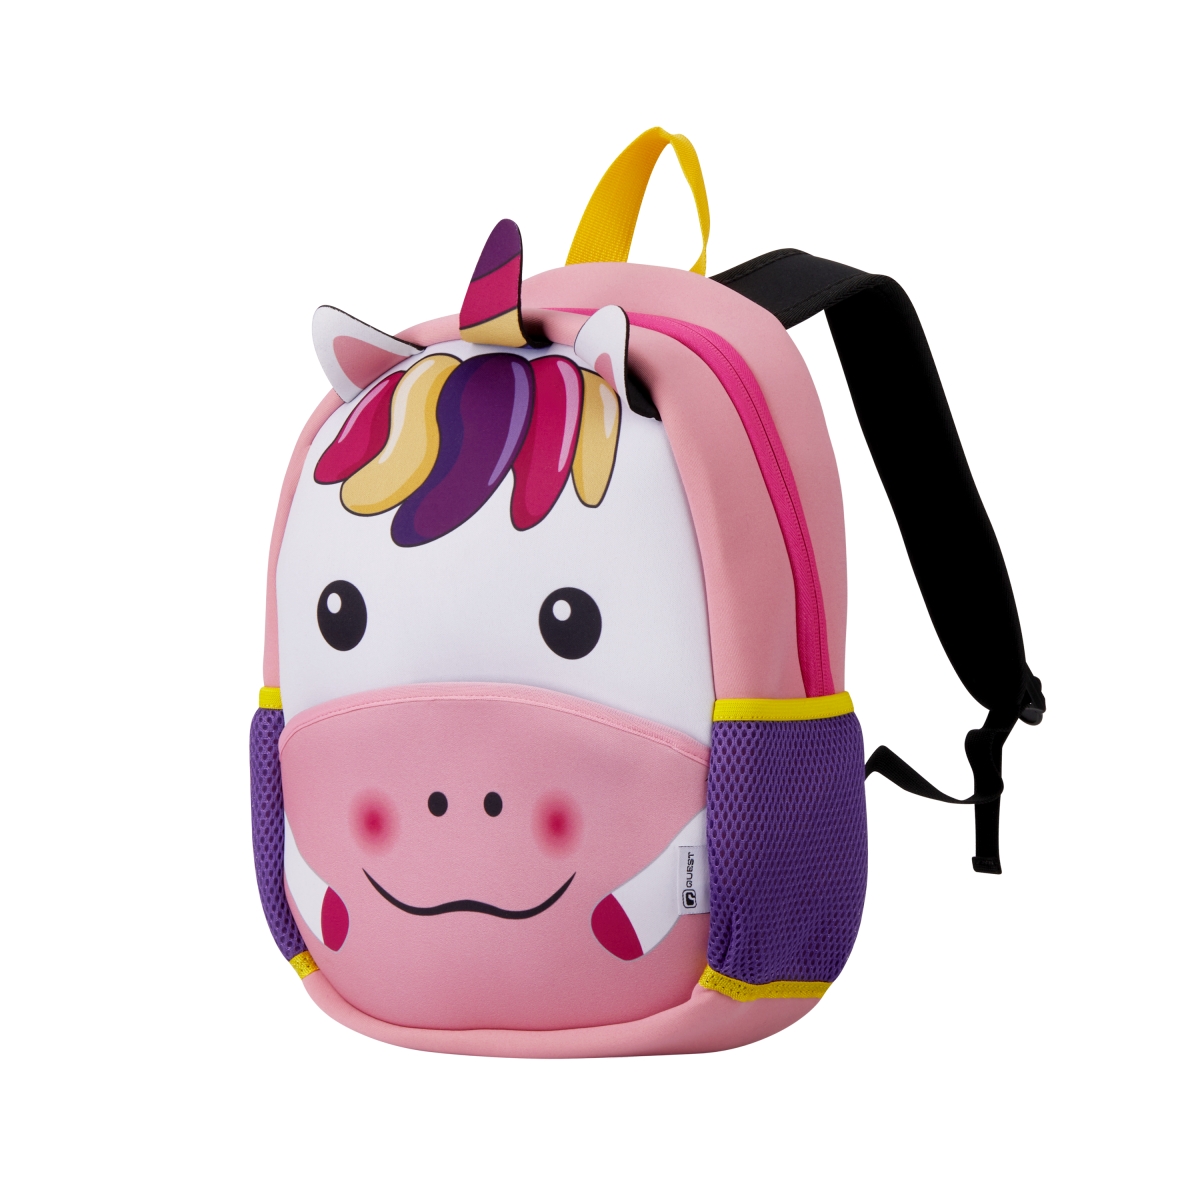 Quest Uni-Smile Neoprene Backpack Pink - Showspace